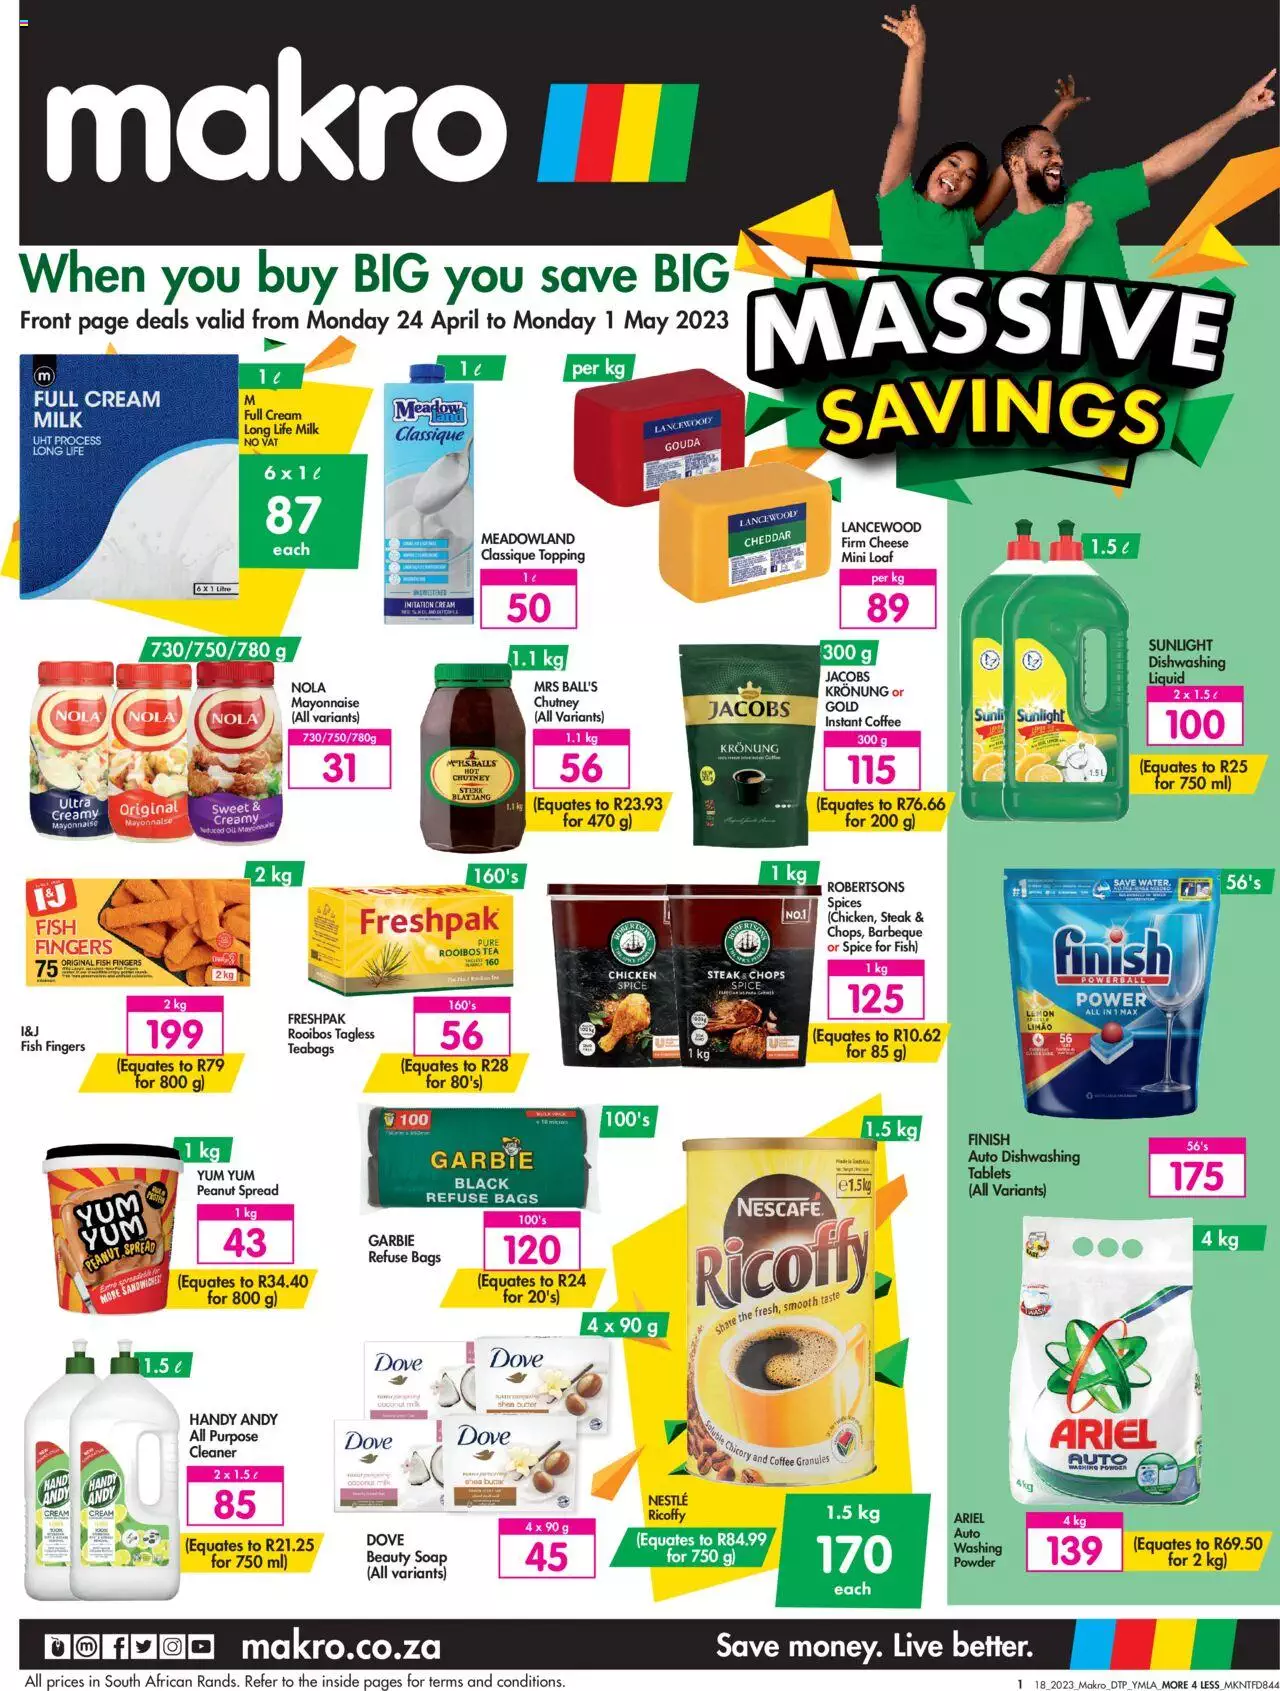 Makro Specials More 4 Less 24 Apr – 1 May 2023